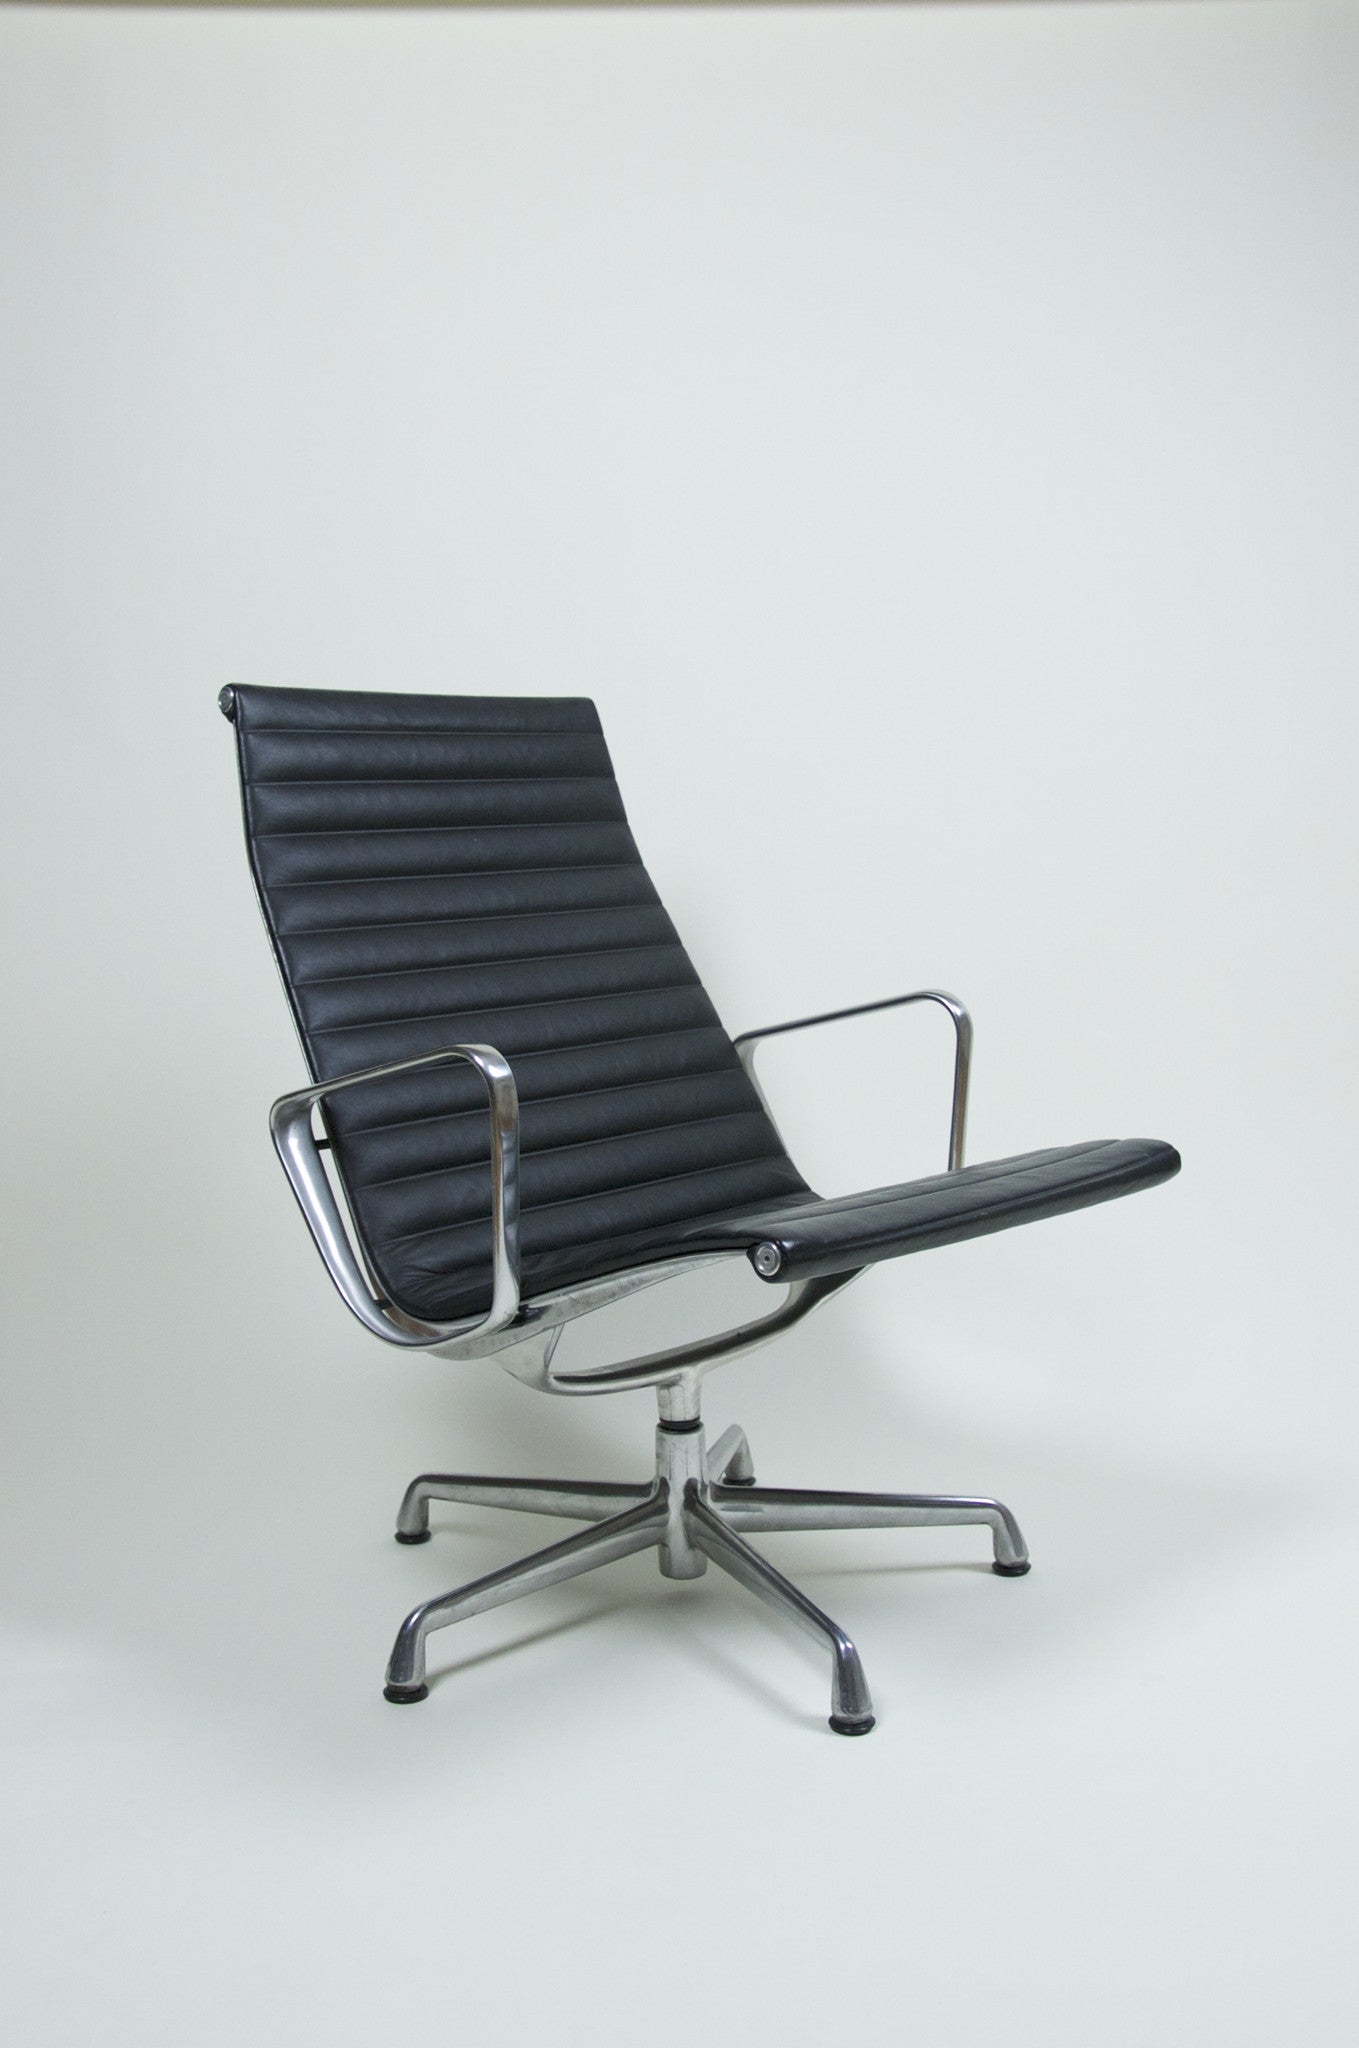 SOLD Eames Herman Miller Aluminum Group Lounge Chair